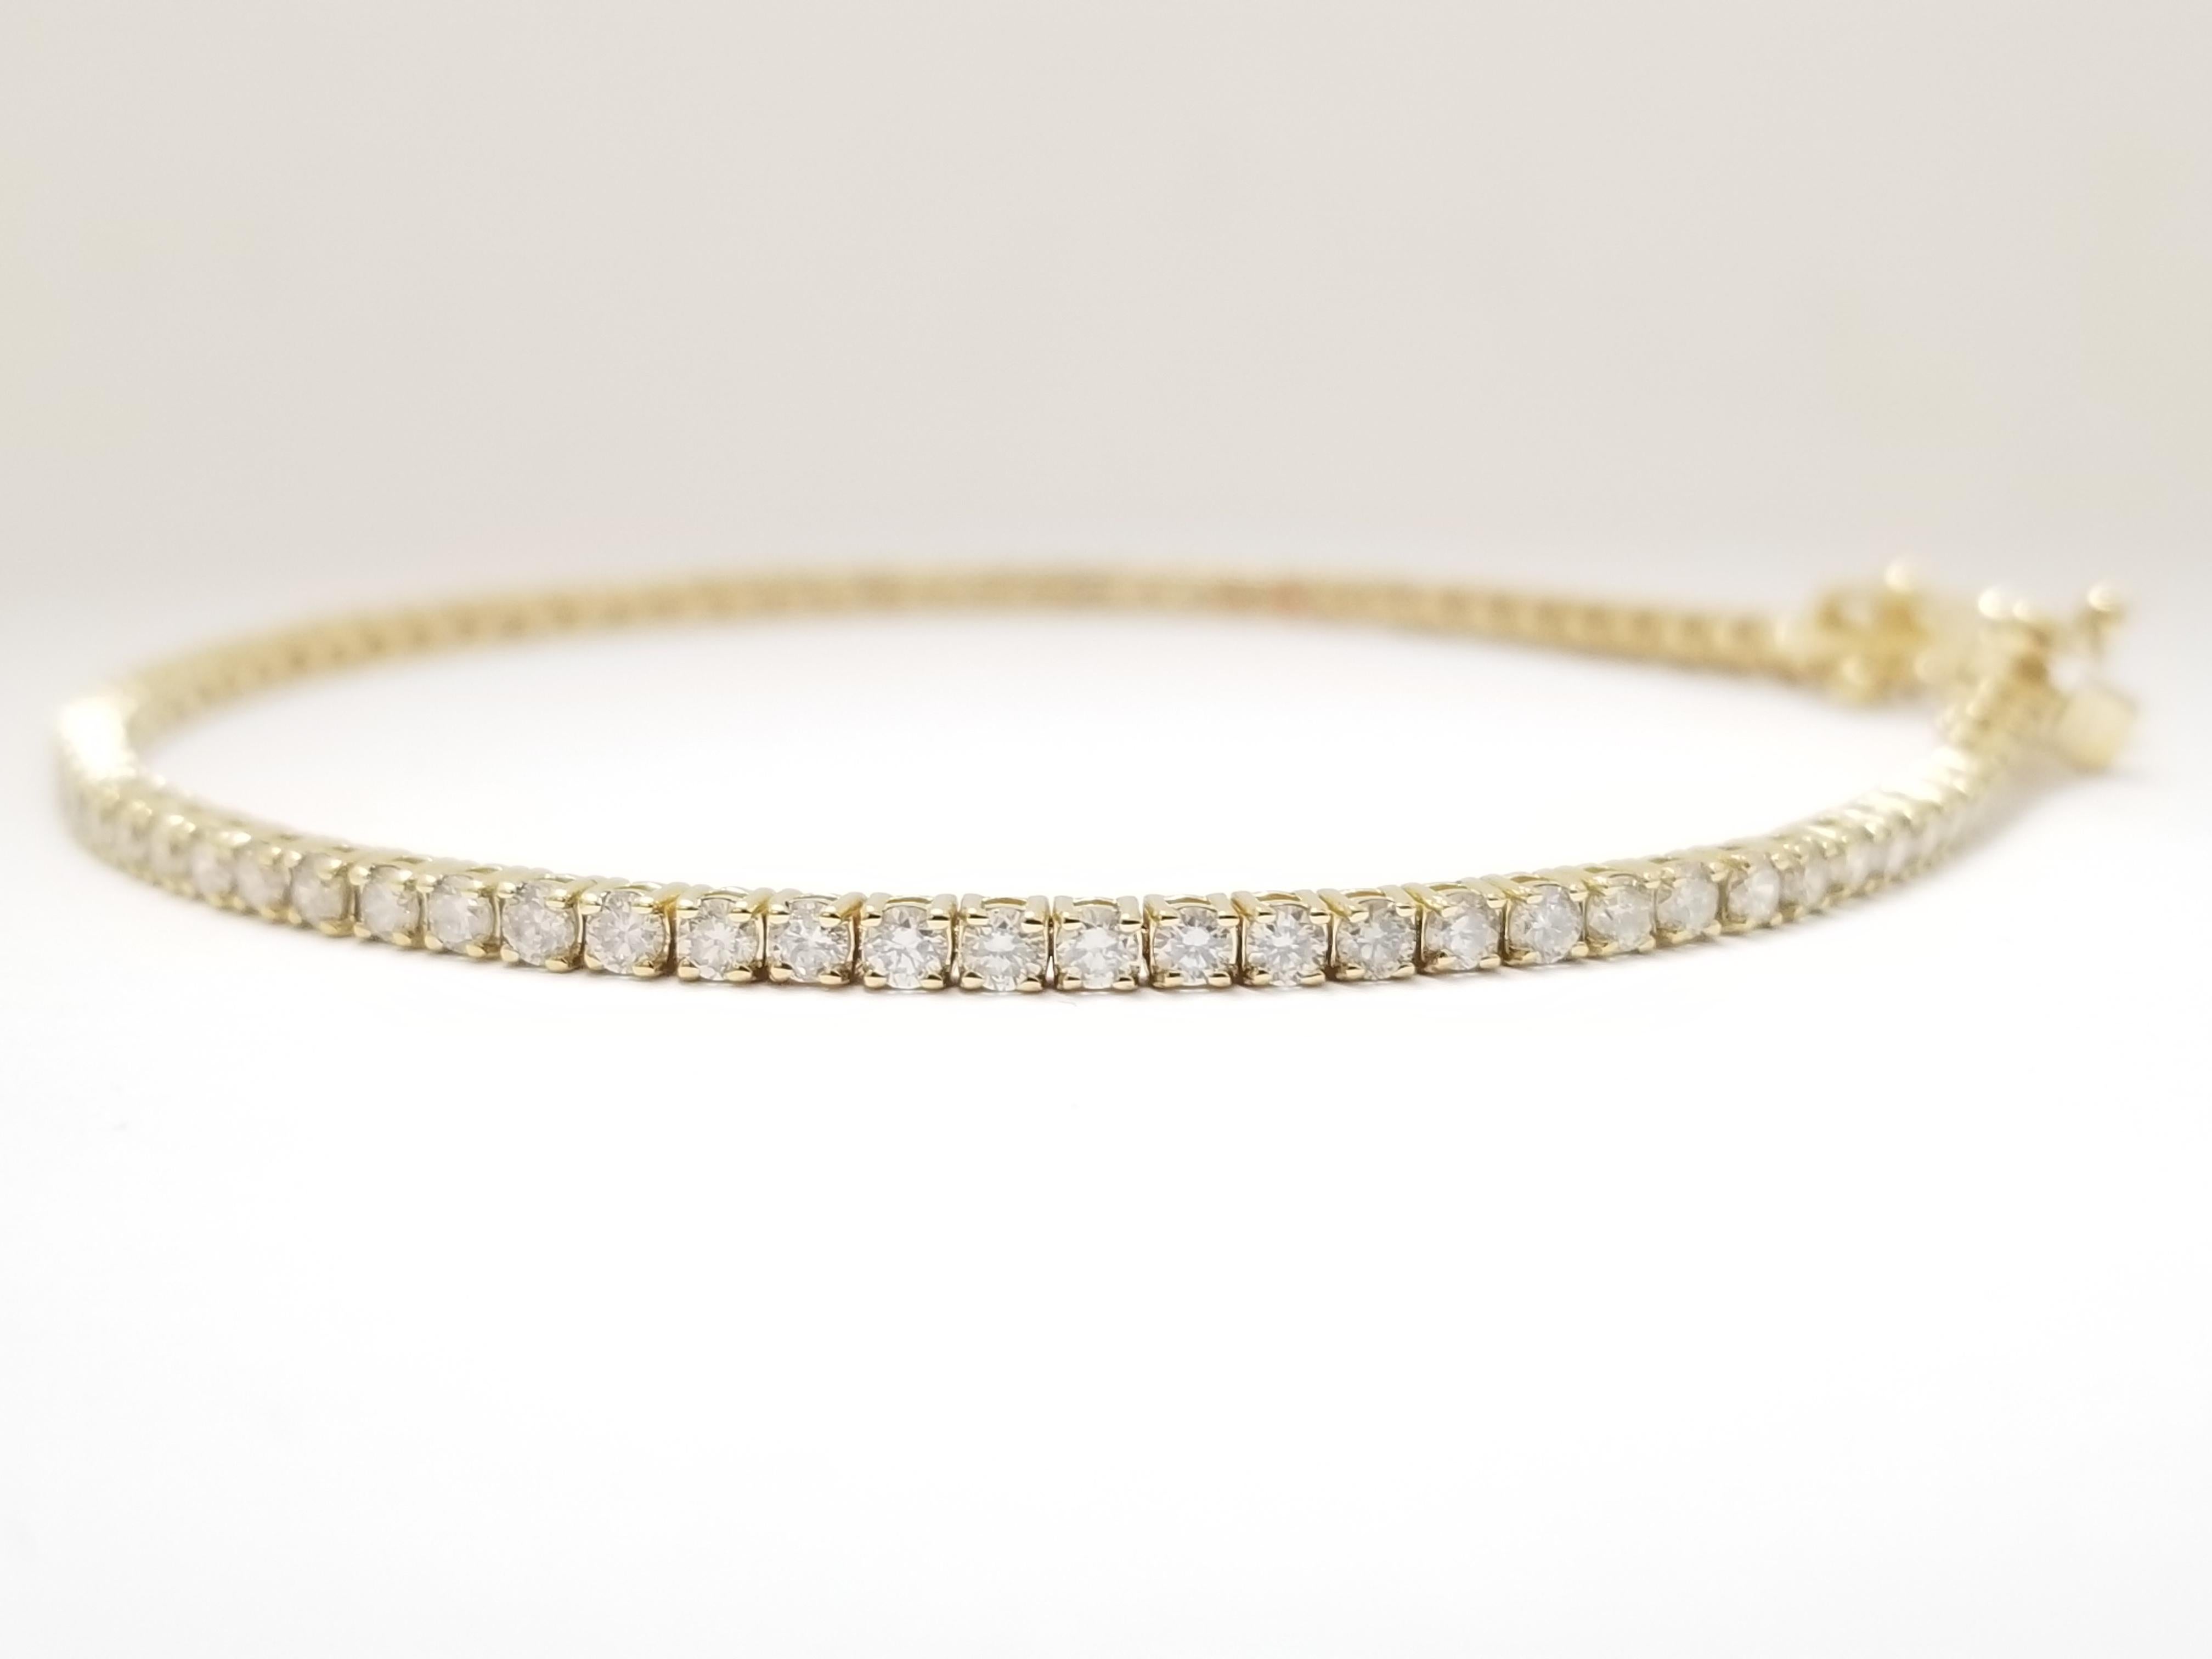 A quality tennis bracelet, natural round-brilliant cut diamonds. 2.85 ct. t.w., . set on 14k yellow gold. each stone is set in a classic four-prong style for maximum light brilliance. Push-button clasp with safety latch. 7 inch length.  Average